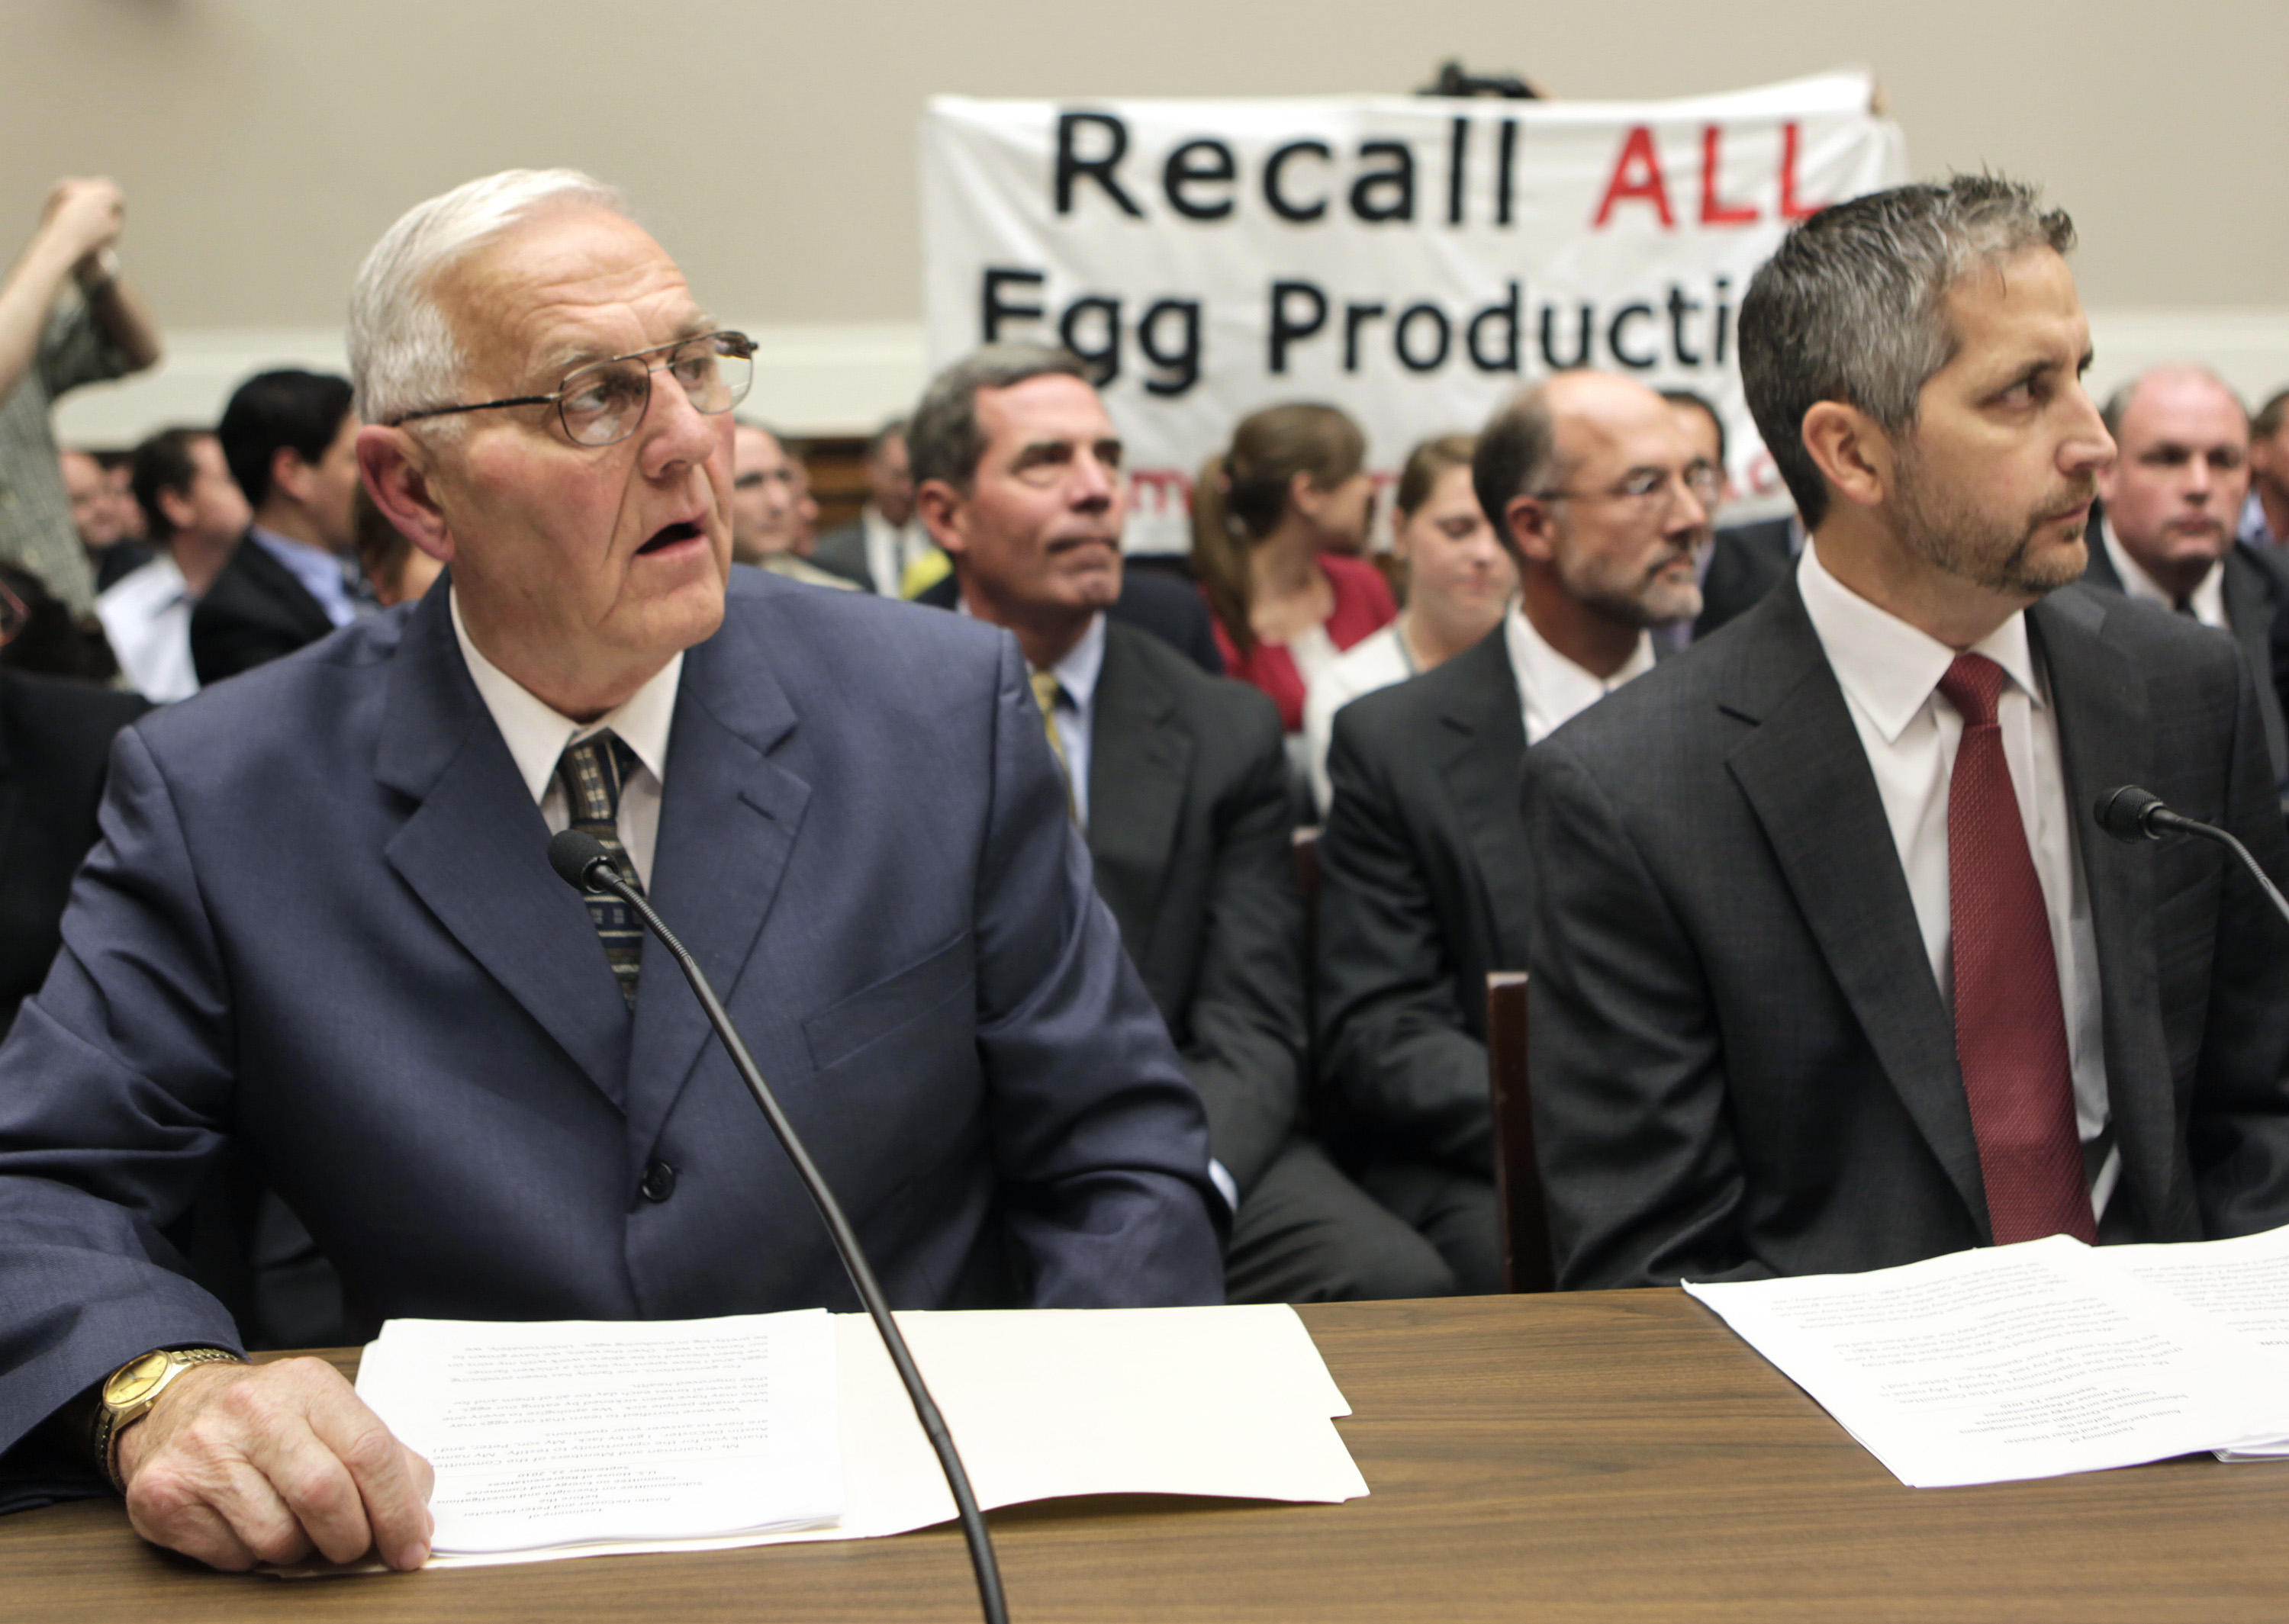 Egg executives in salmonella case must report to prison, judge says - CBS News3000 x 2129